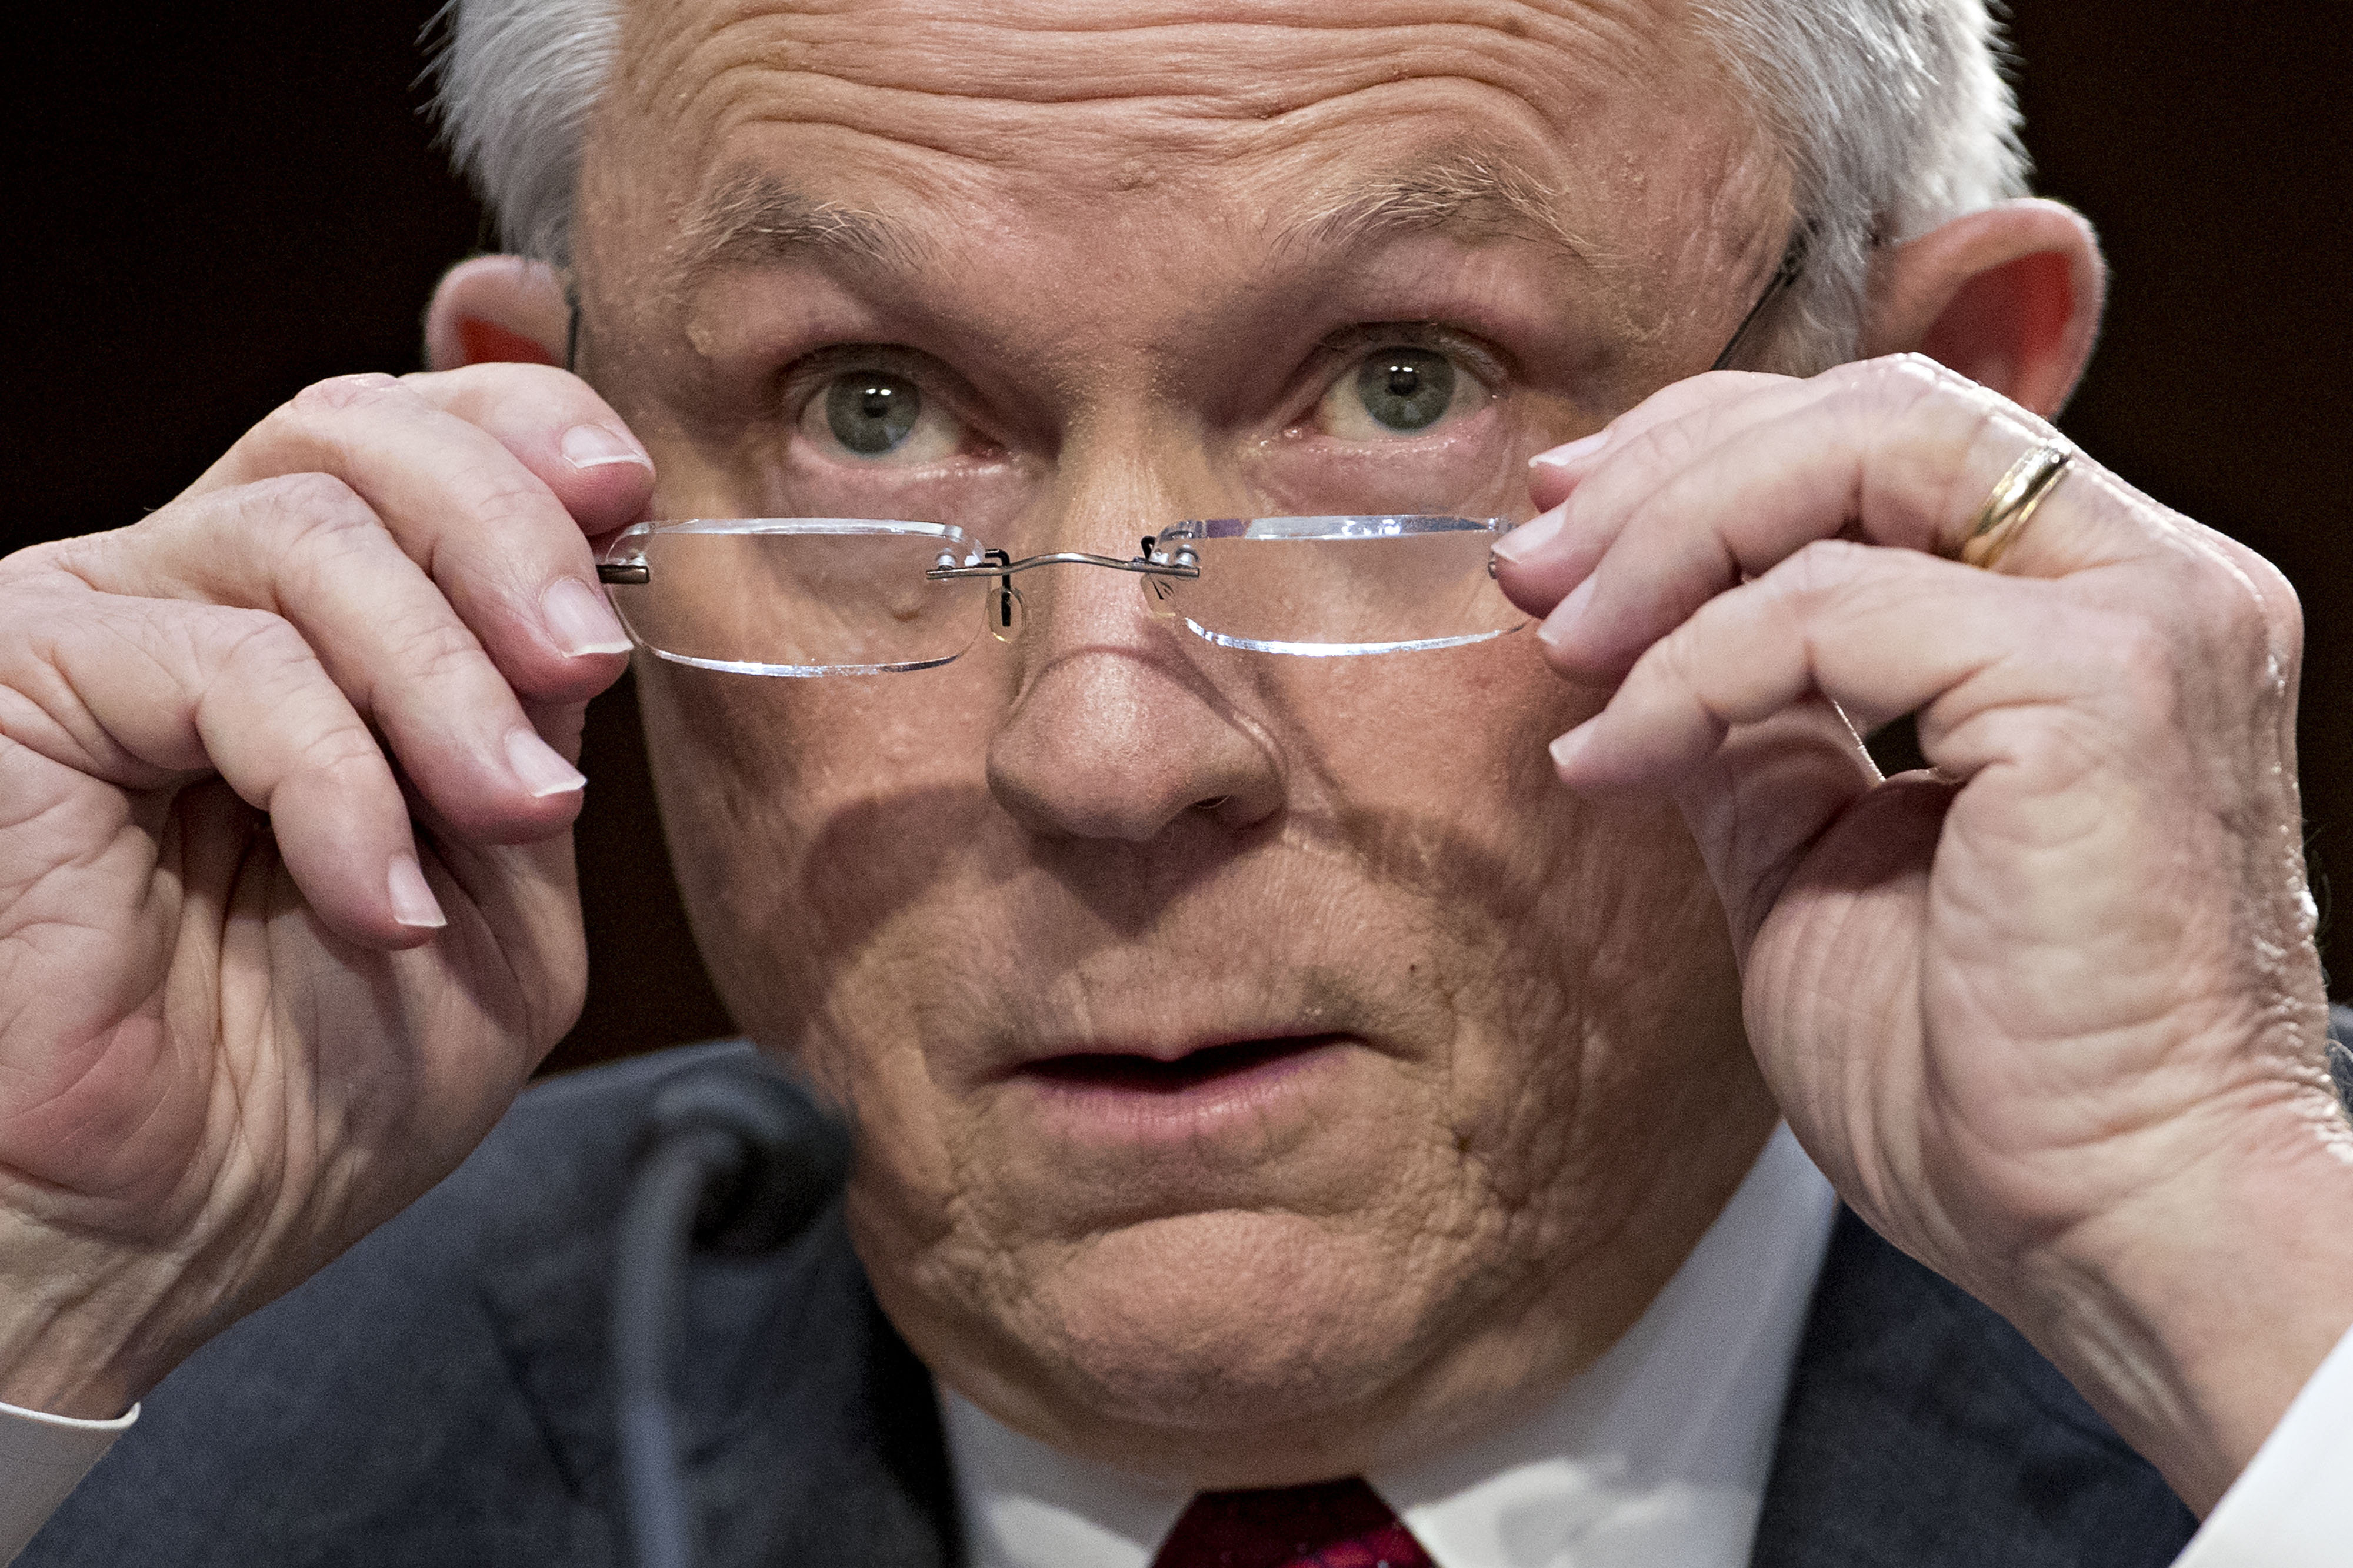 Jeff Sessions, U.S. attorney general, removes his glasses during a Senate Intelligence Committee hearing in Washington, D.C., on June 13, 2017. (Andrew Harrer—Bloomberg/Getty Images)